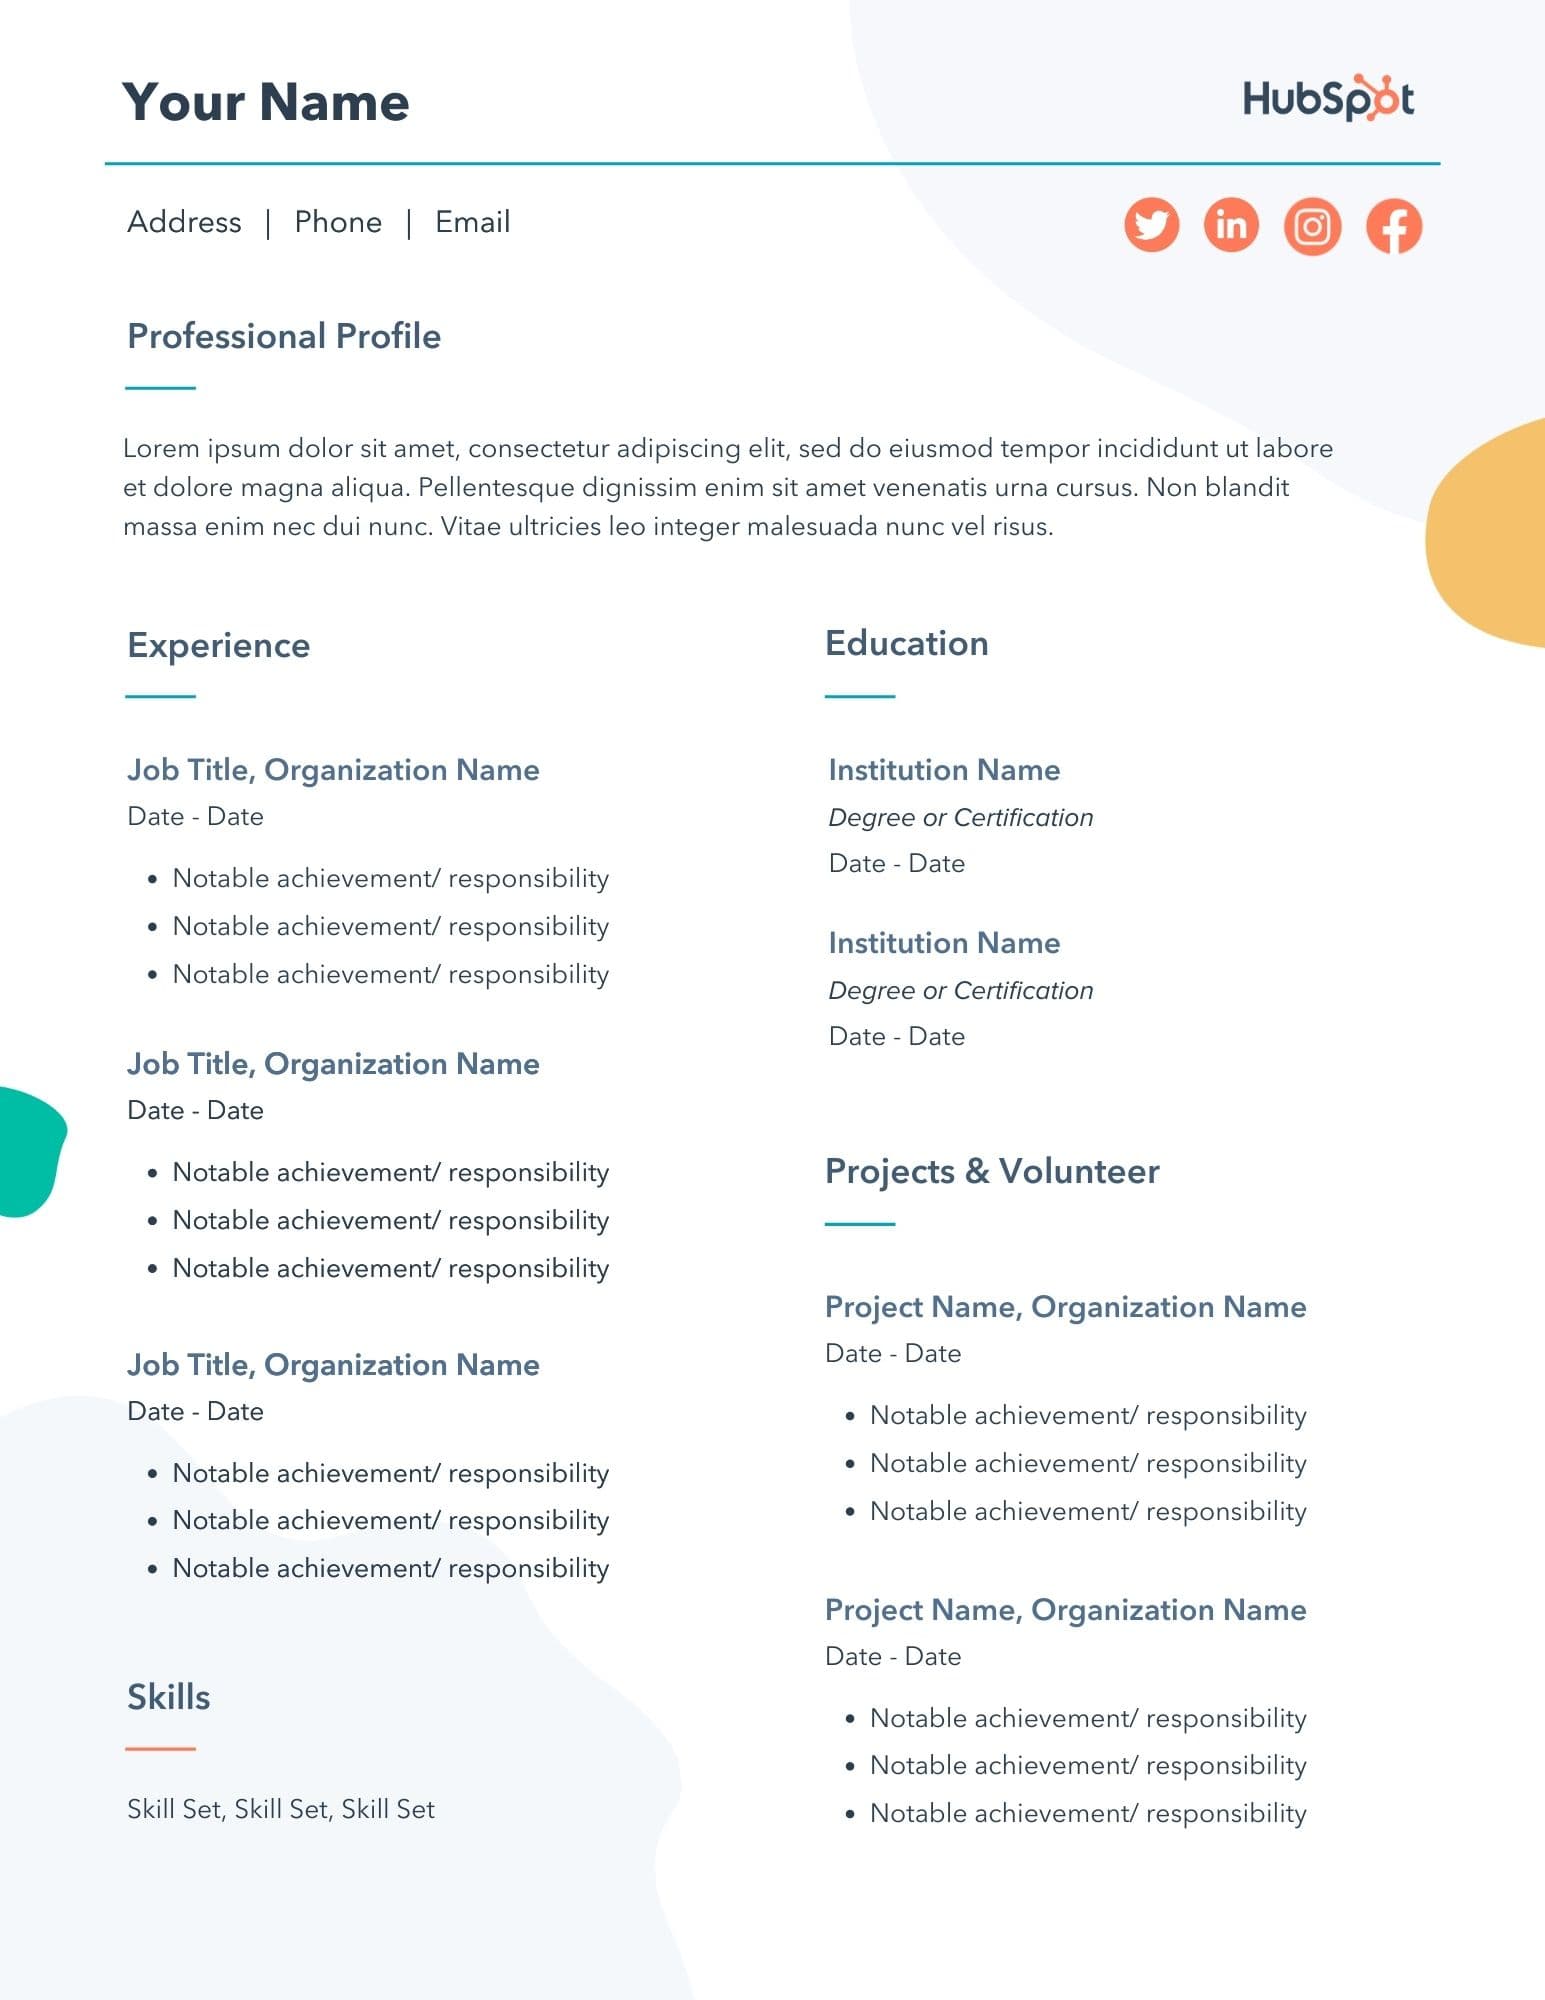 29-free-resume-templates-for-microsoft-word-how-to-make-your-own-iac